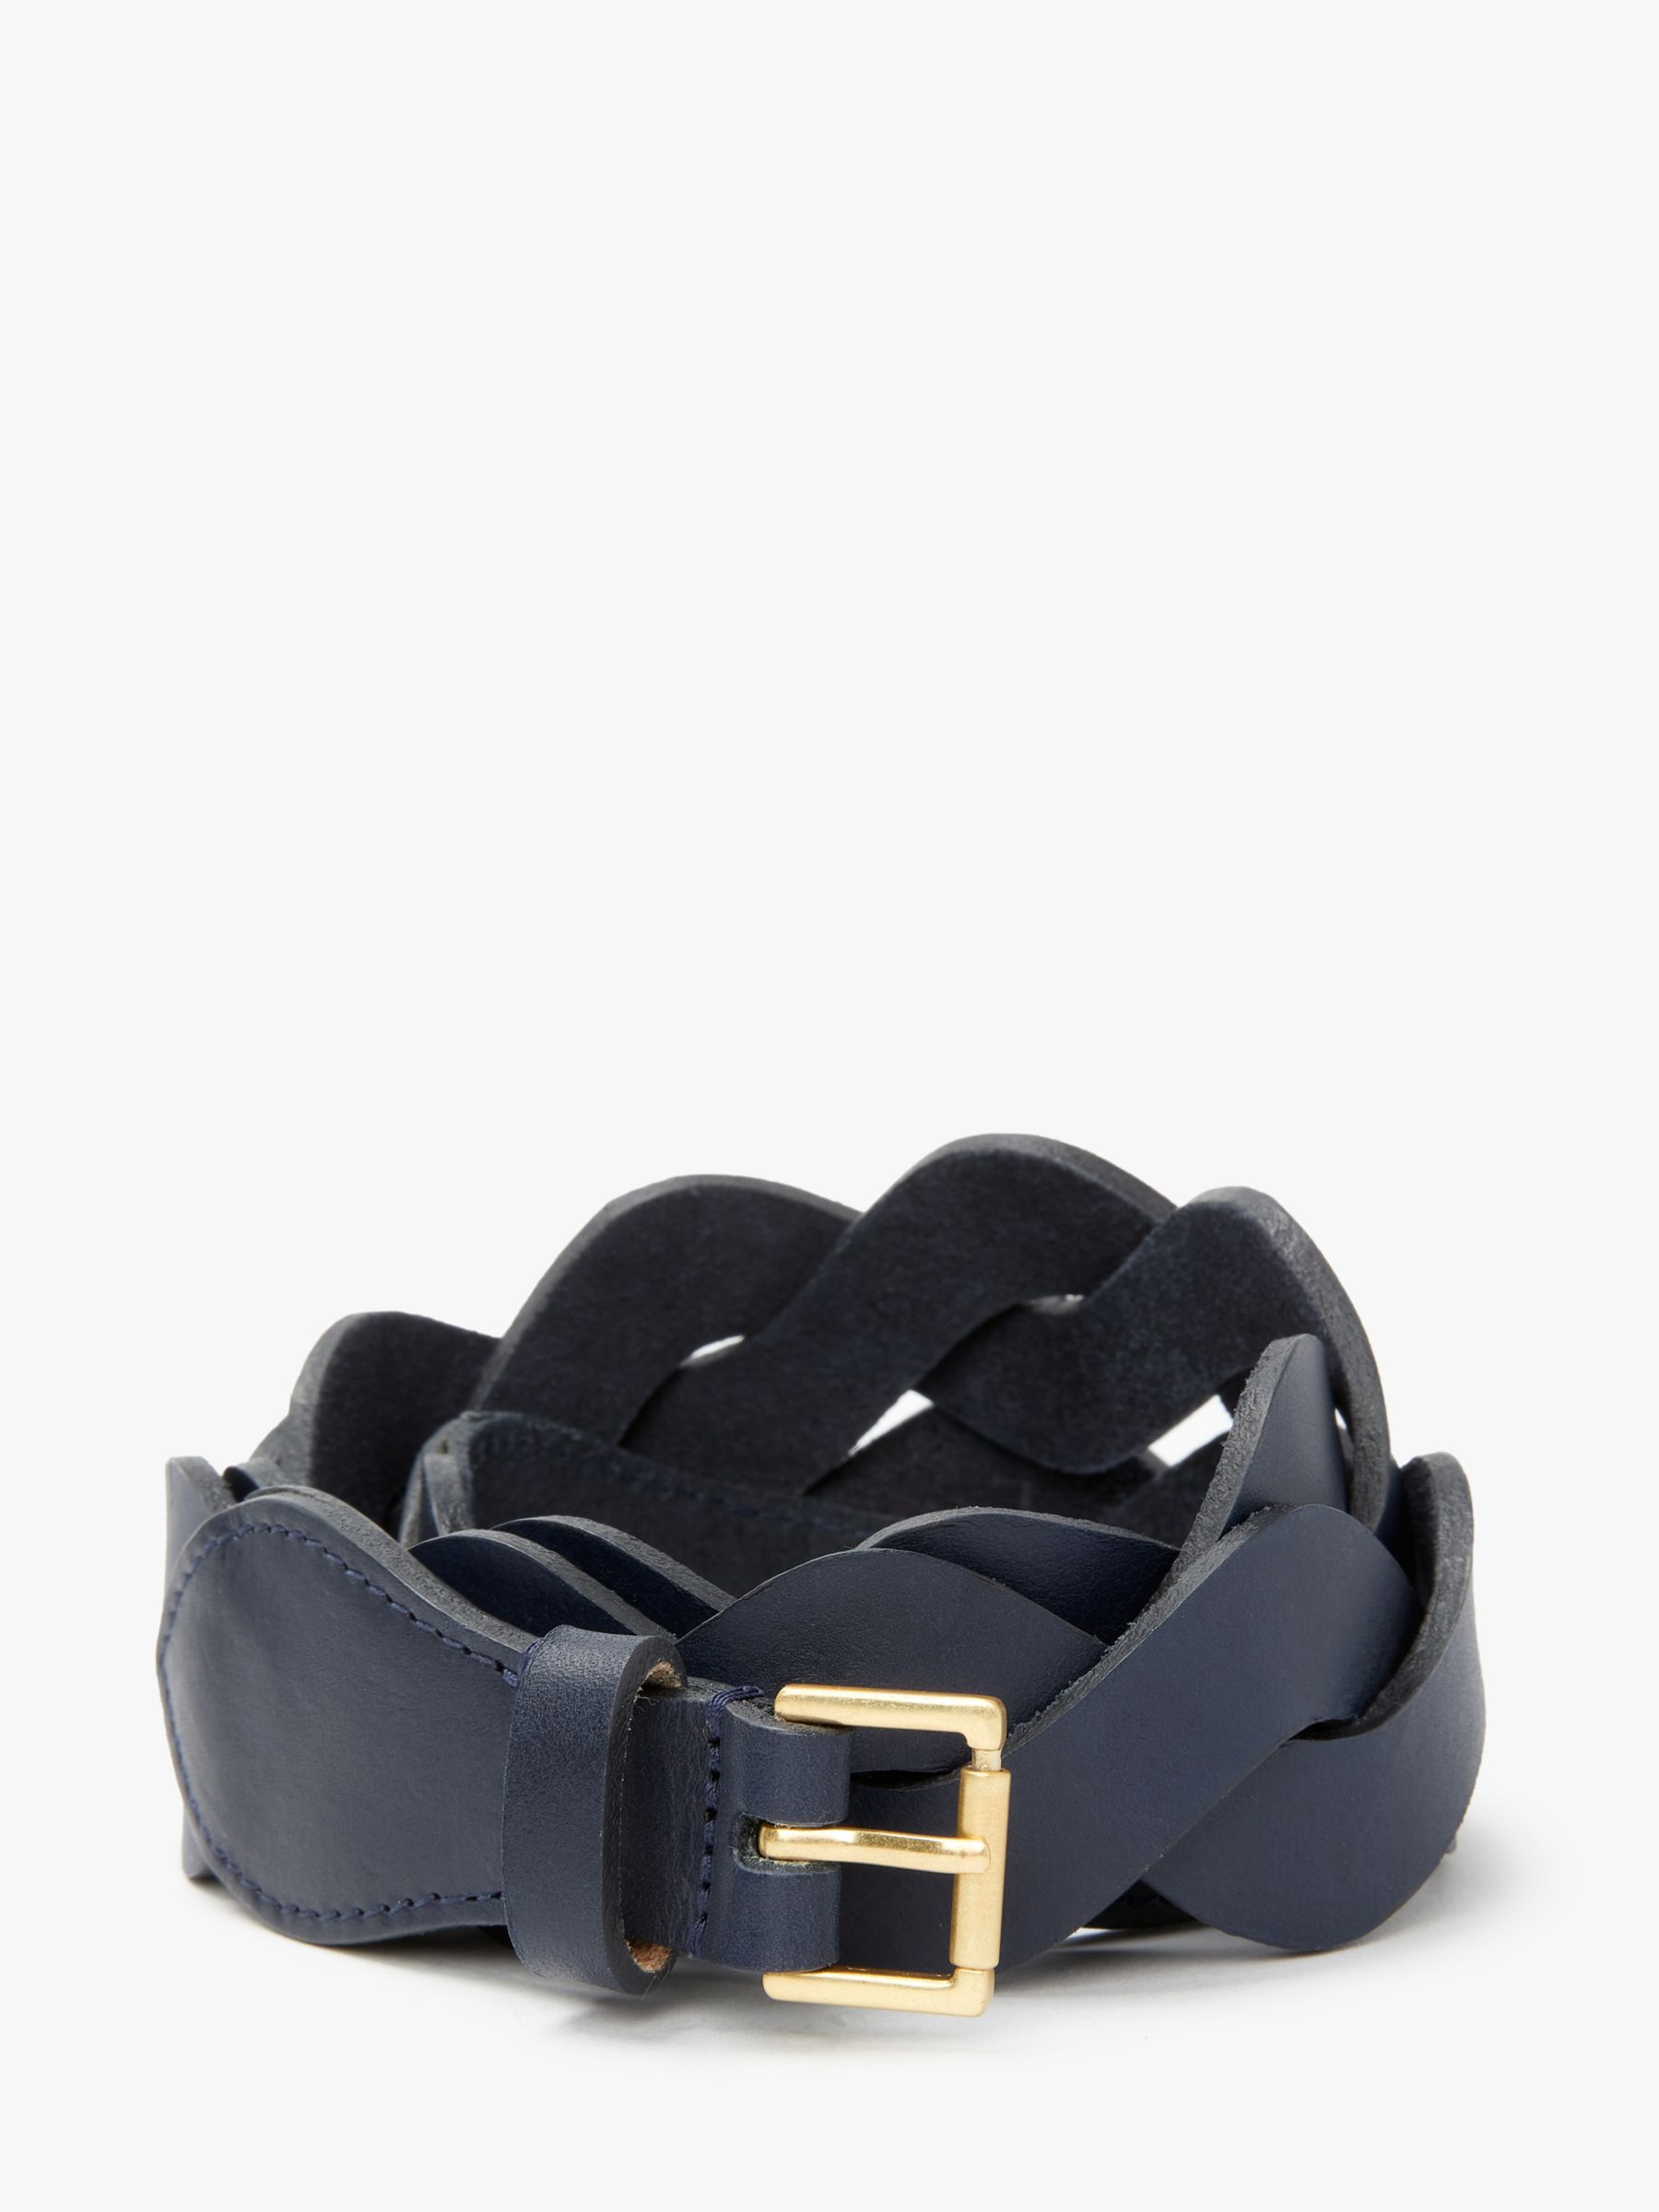 Boden Woven Leather Belt at John Lewis & Partners